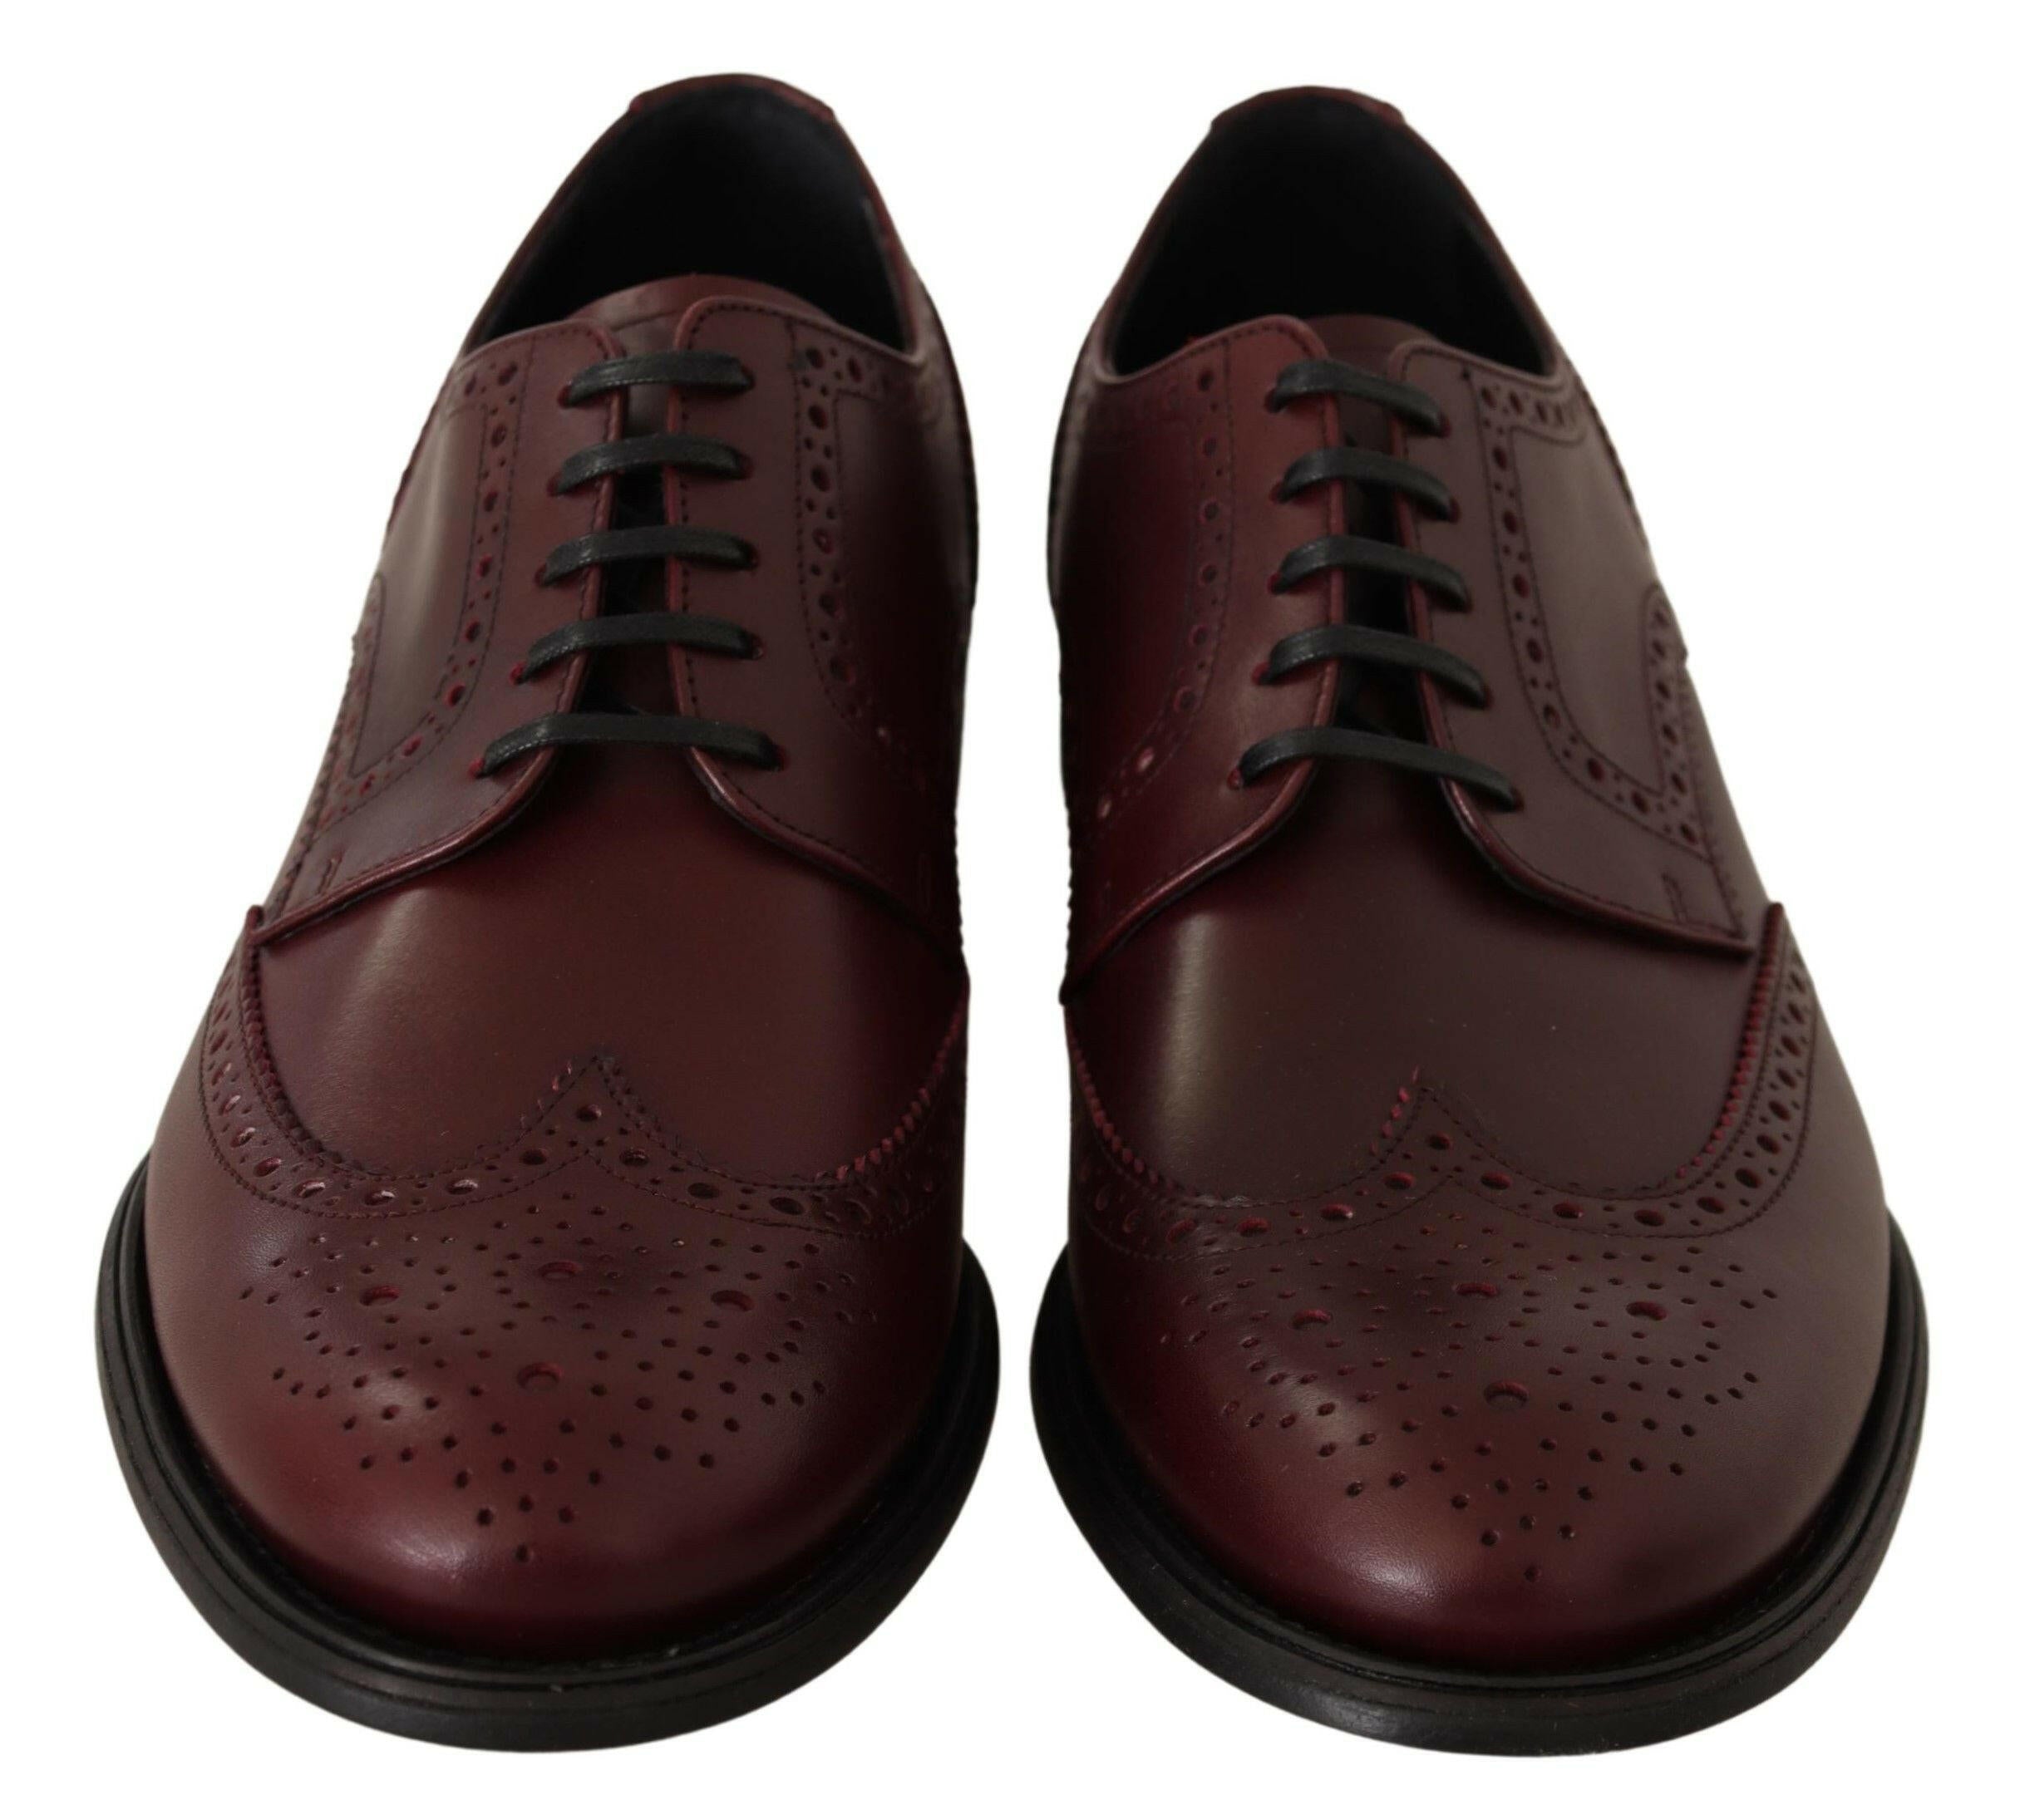 Dolce & Gabbana Bordeaux Leather Oxford Wingtip Formal Shoes - GENUINE AUTHENTIC BRAND LLC  